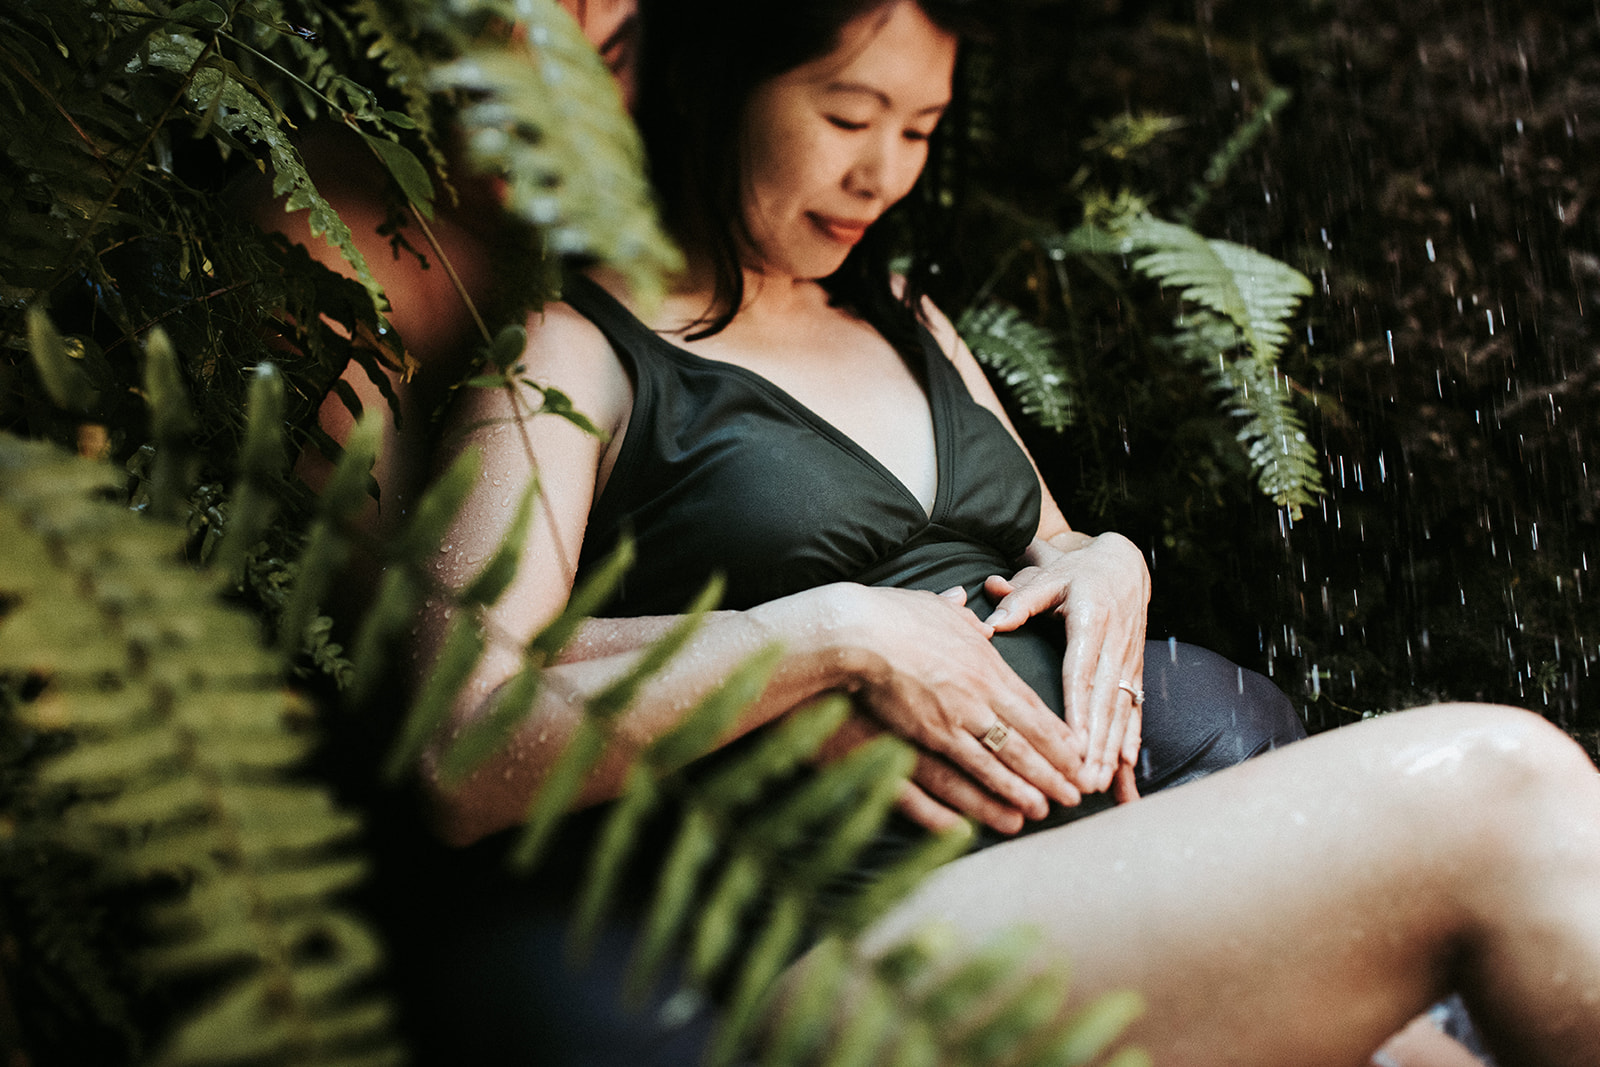 maternity pho to session